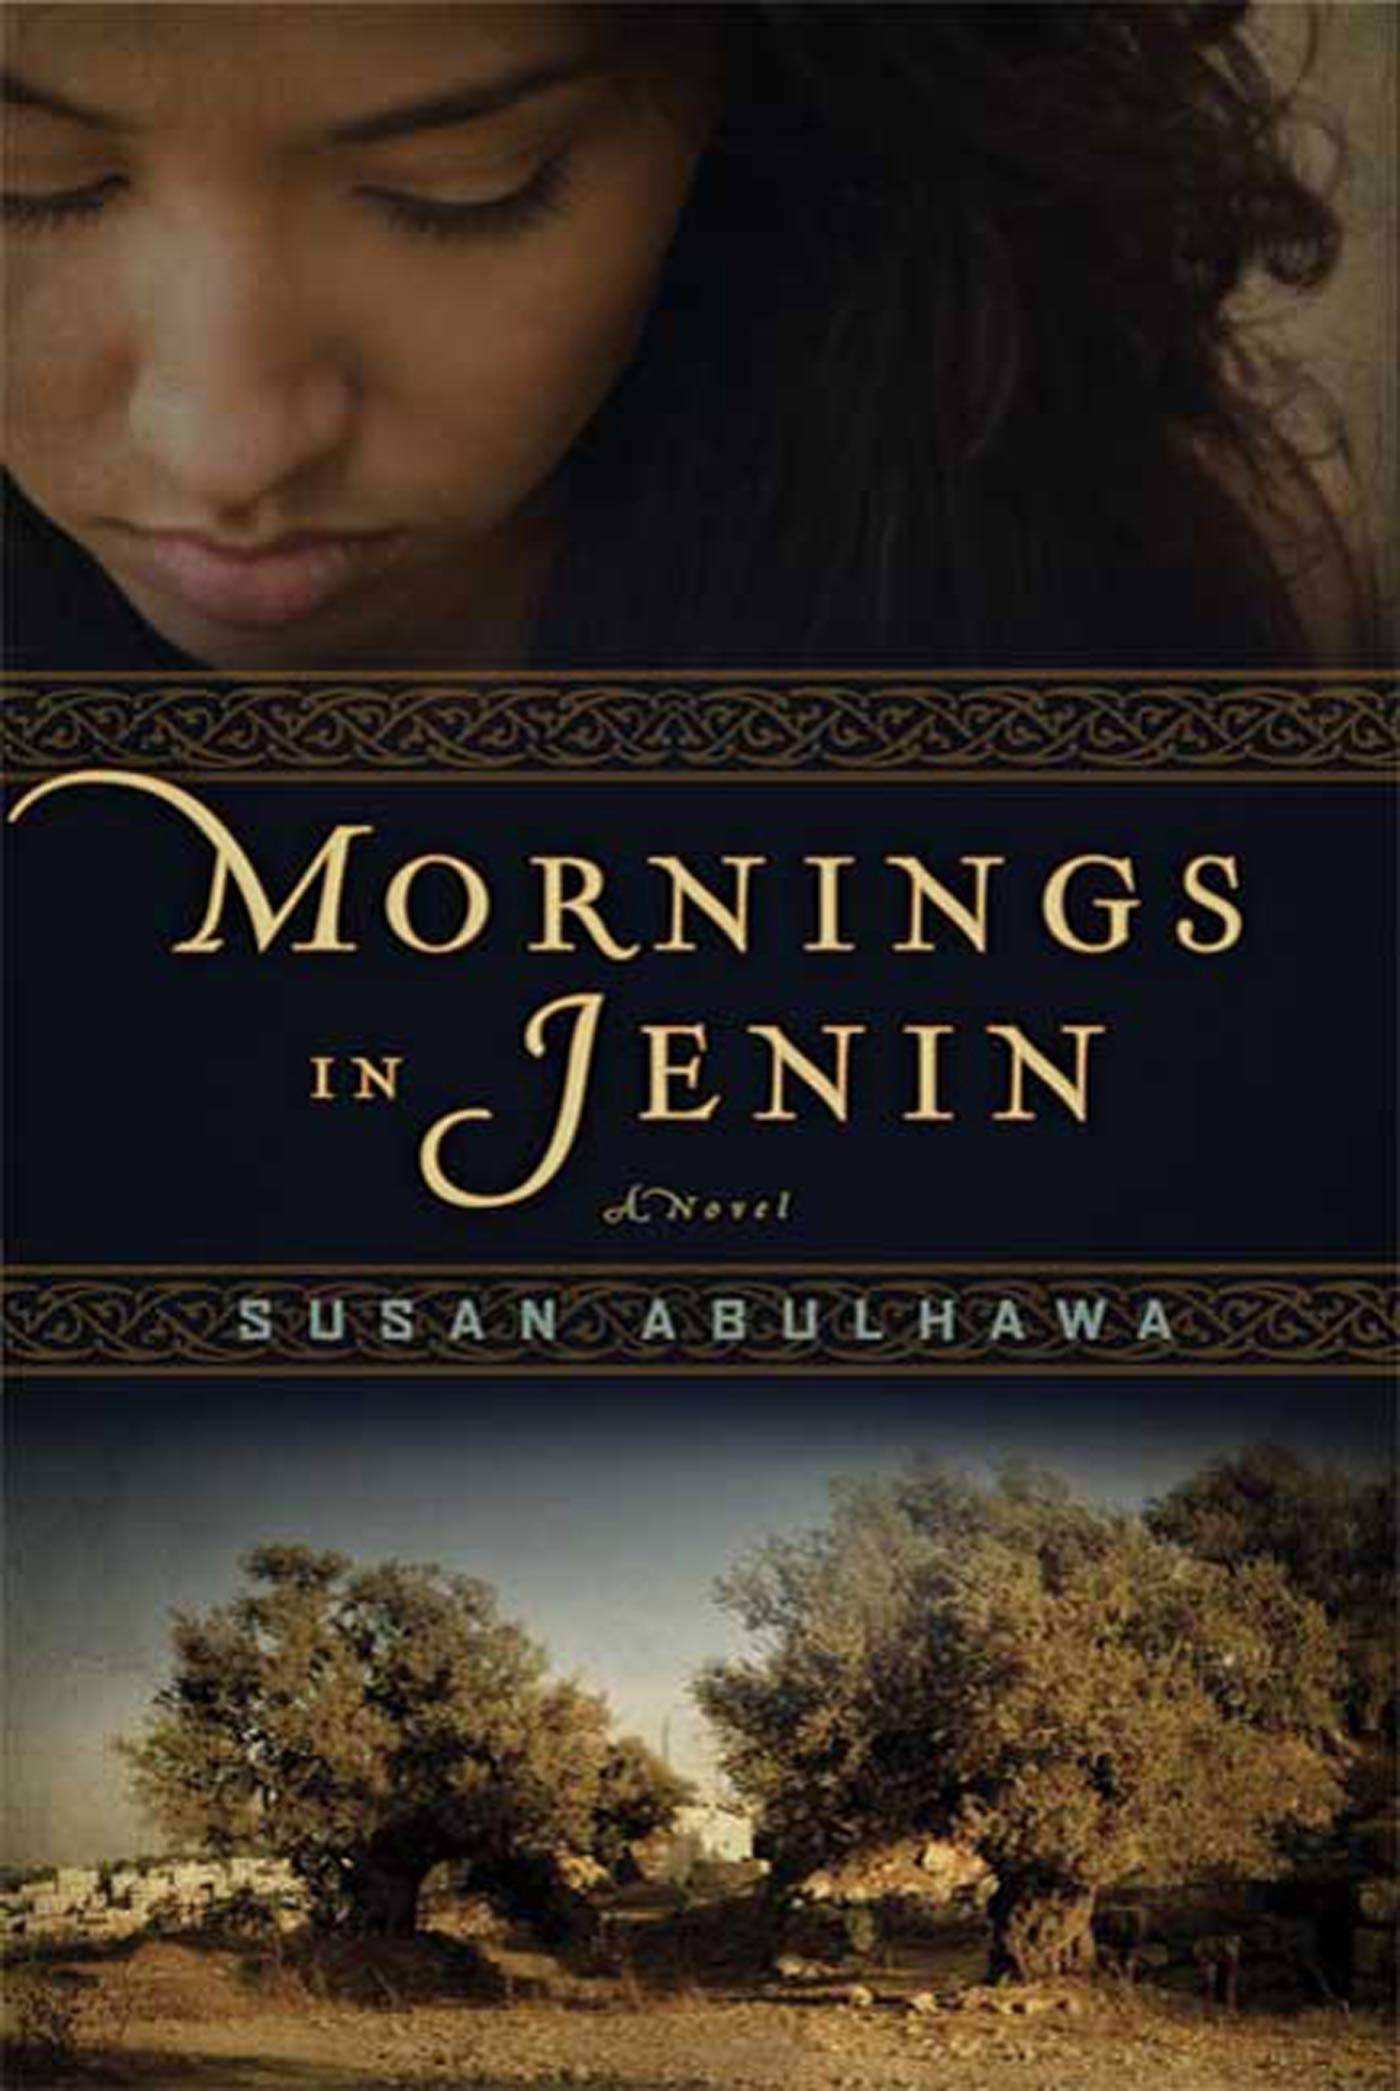 Book cover featuring a photo of a person looking down at the top and a grove of trees at the bottom